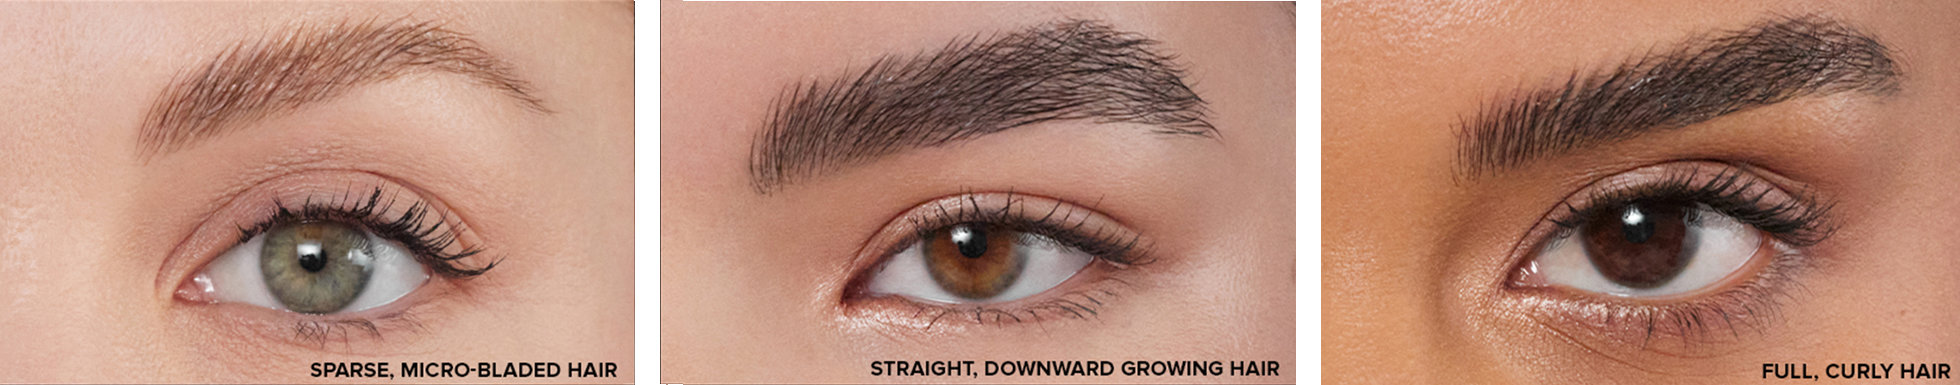 Brow Freeze Gel can be used for: Sparse, micro-bladed hair; Straight, downward growing hair; and Full, curly hair